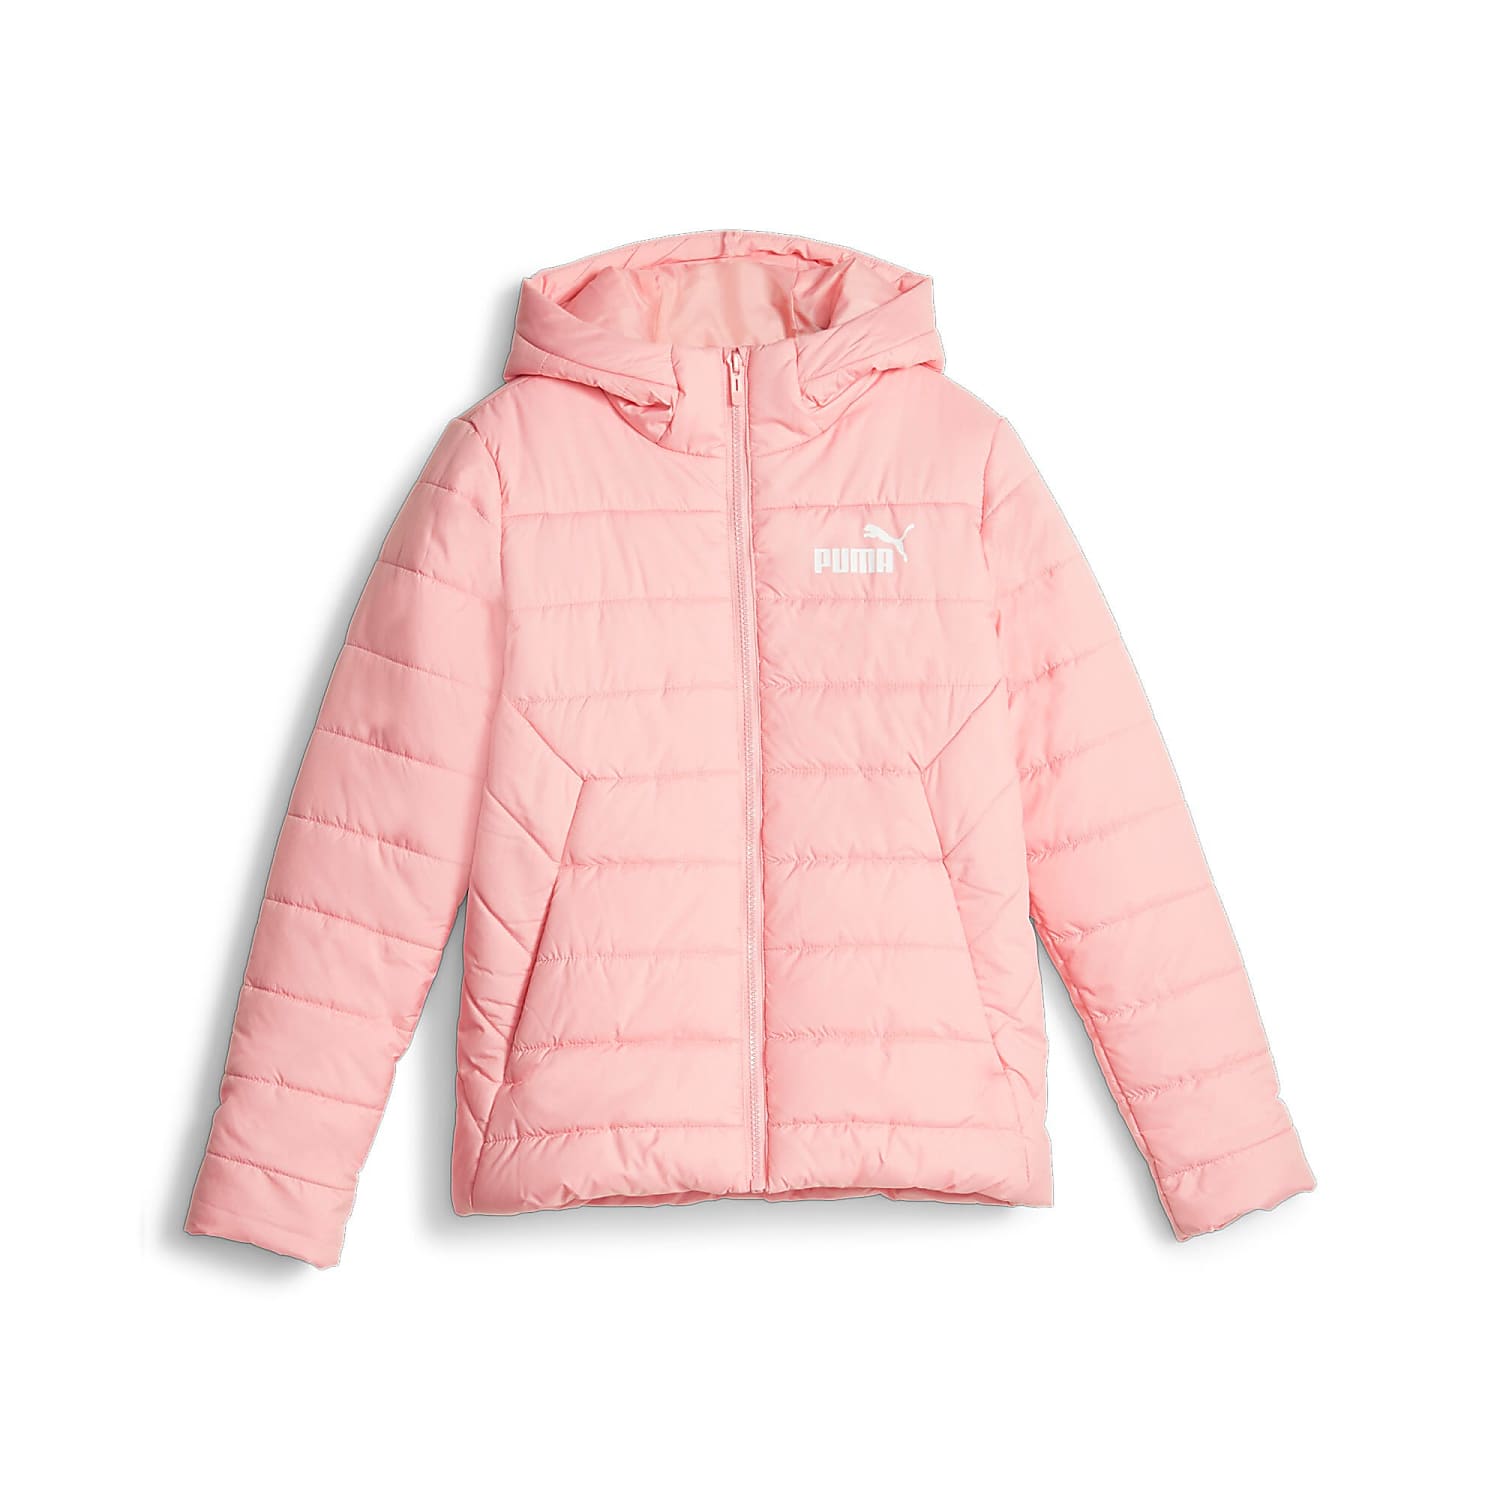 Smoothie - HOODED ESS PADDED Fast and Puma Peach JACKET, shipping cheap BOYS